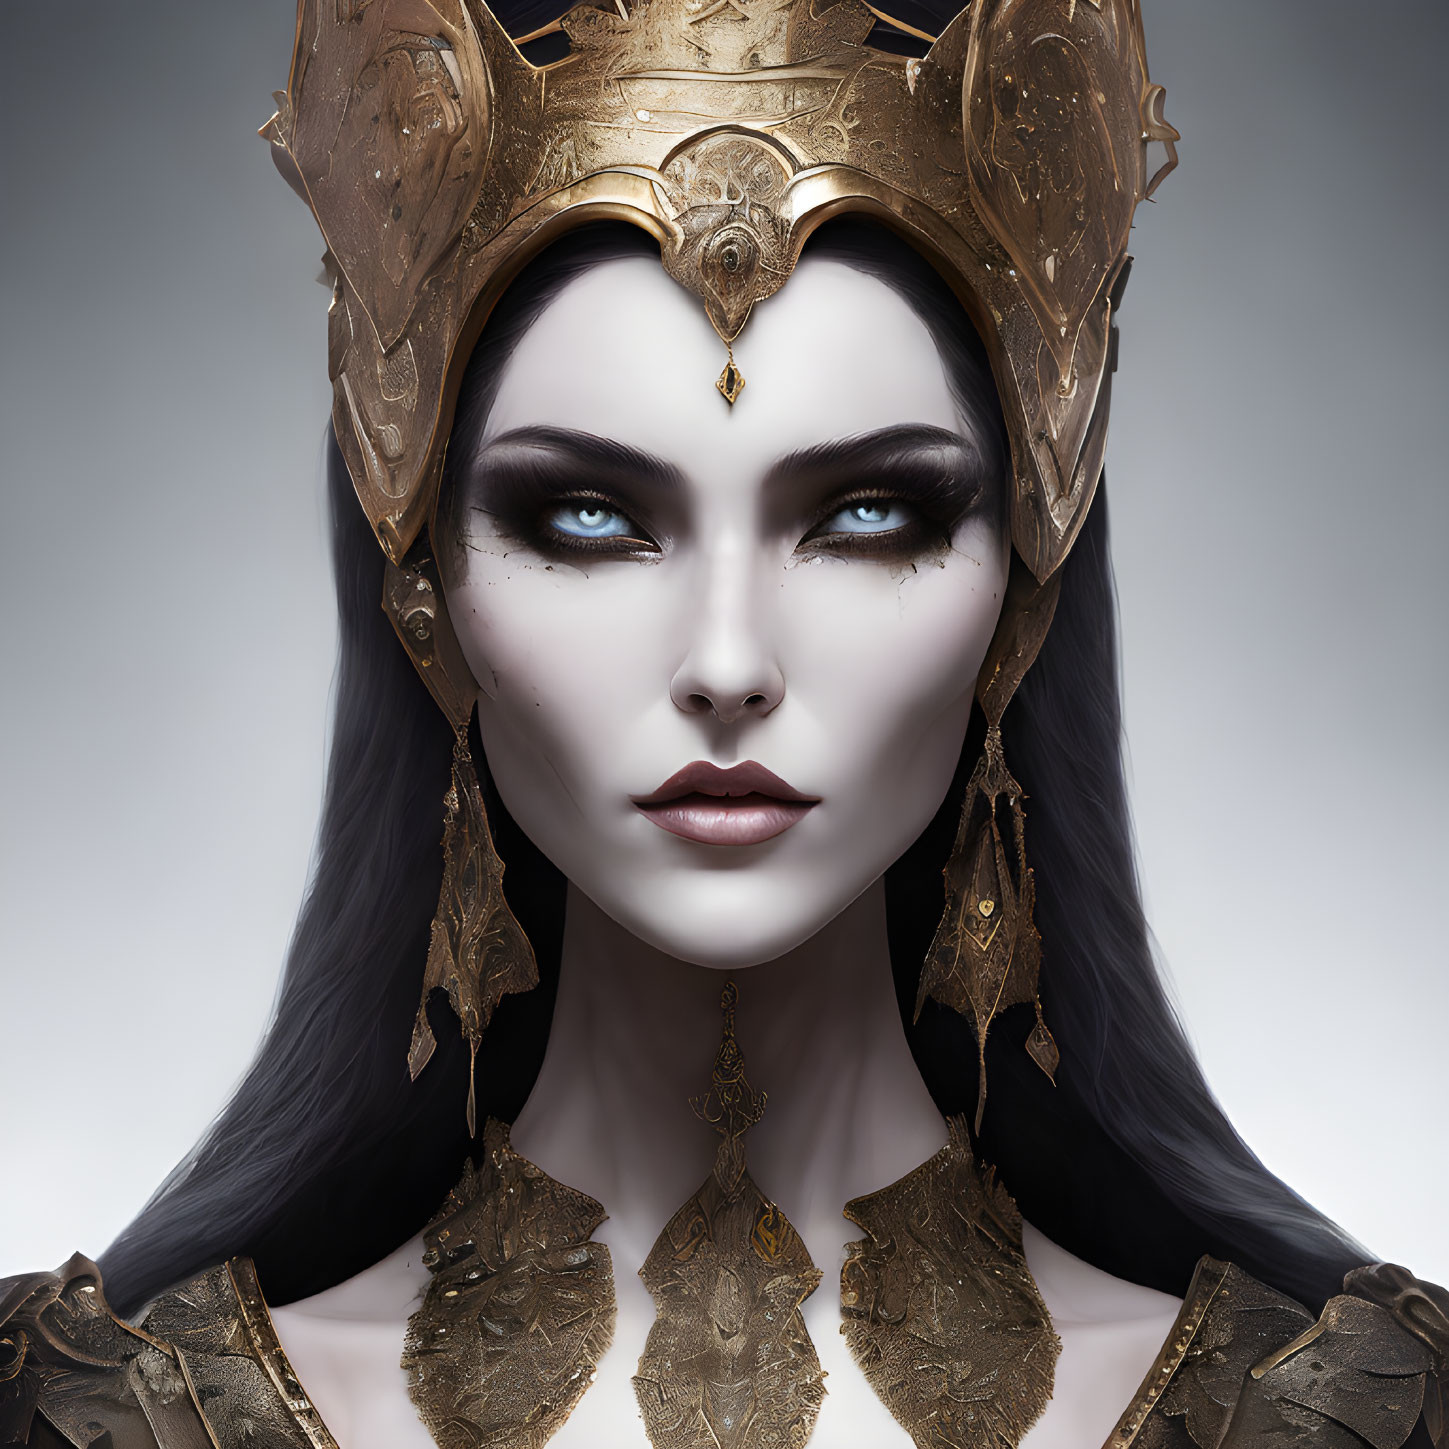 Regal female character with blue eyes in golden crown and armor